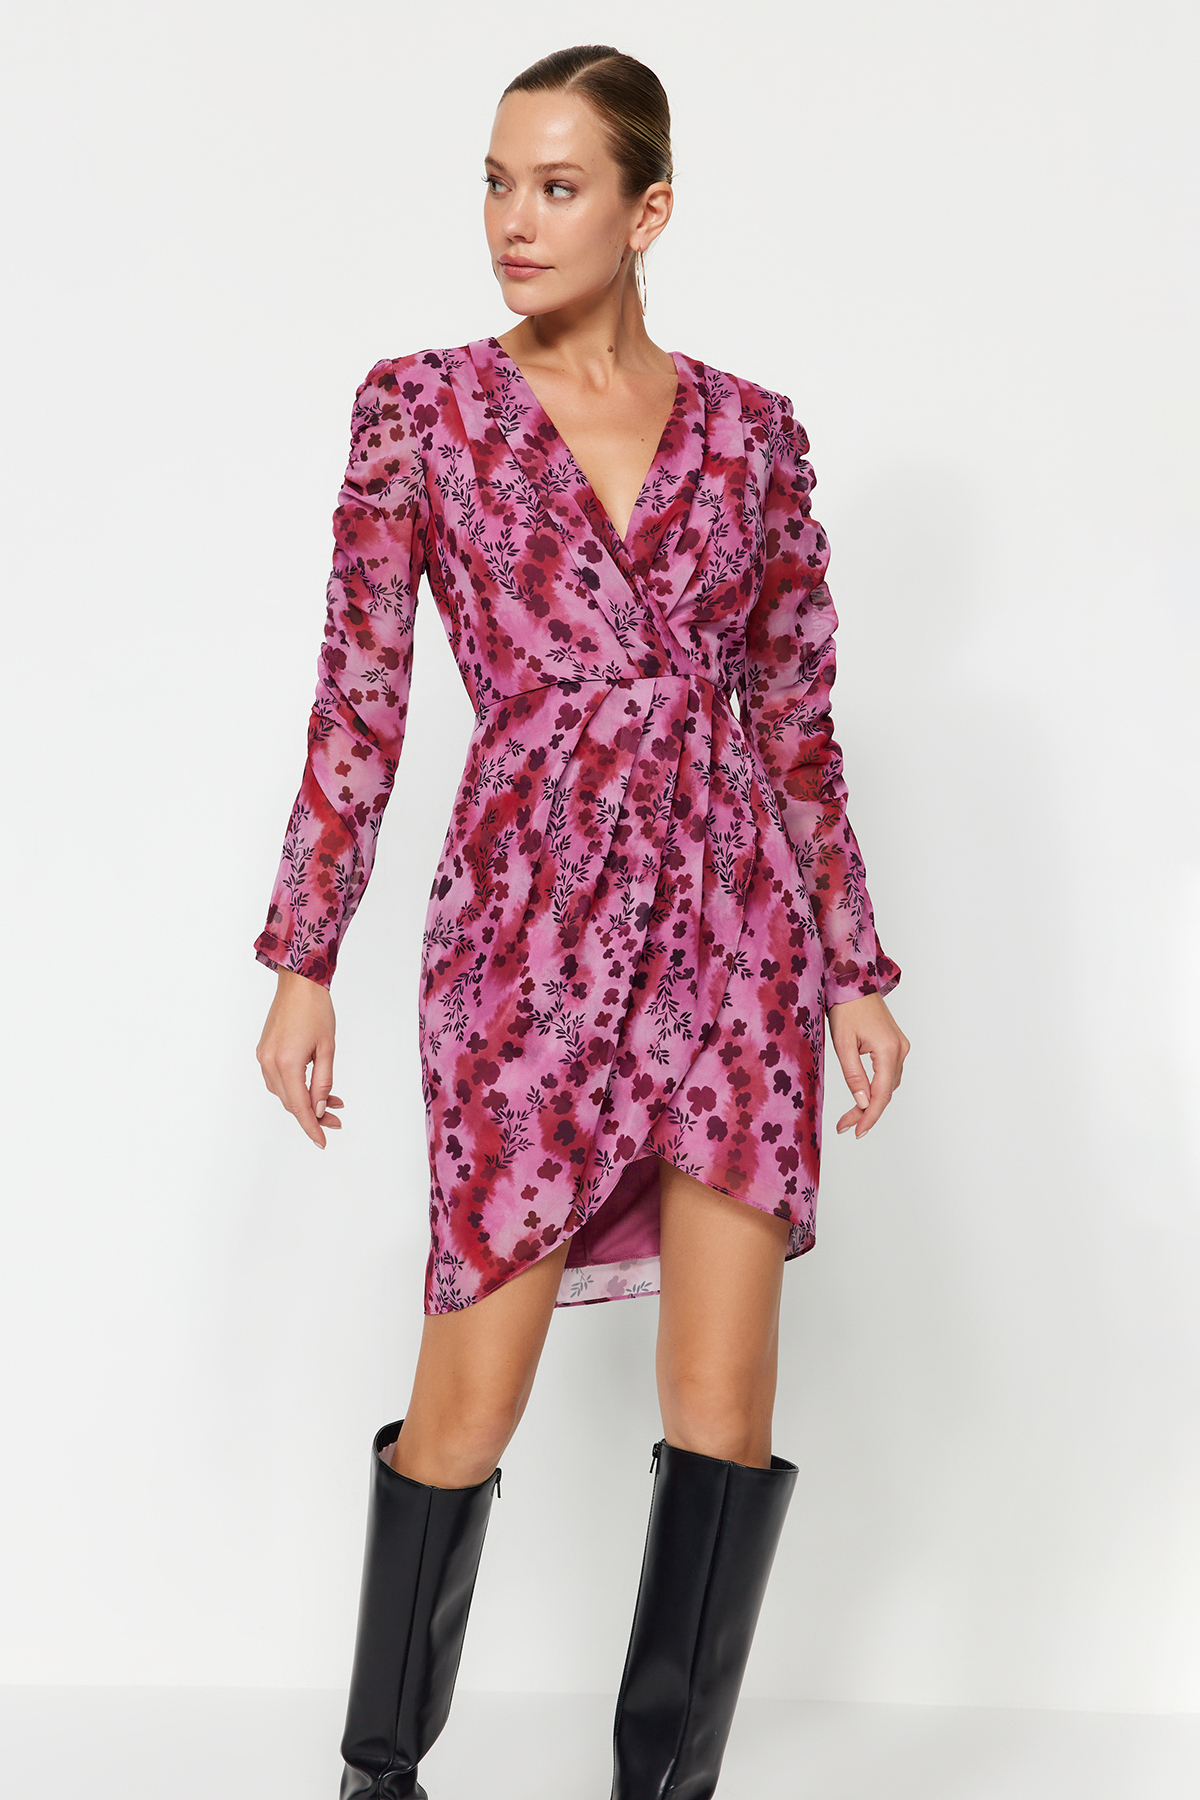 Trendyol Multi Color Double Breasted Mini Lined Floral Pattern Woven Dress